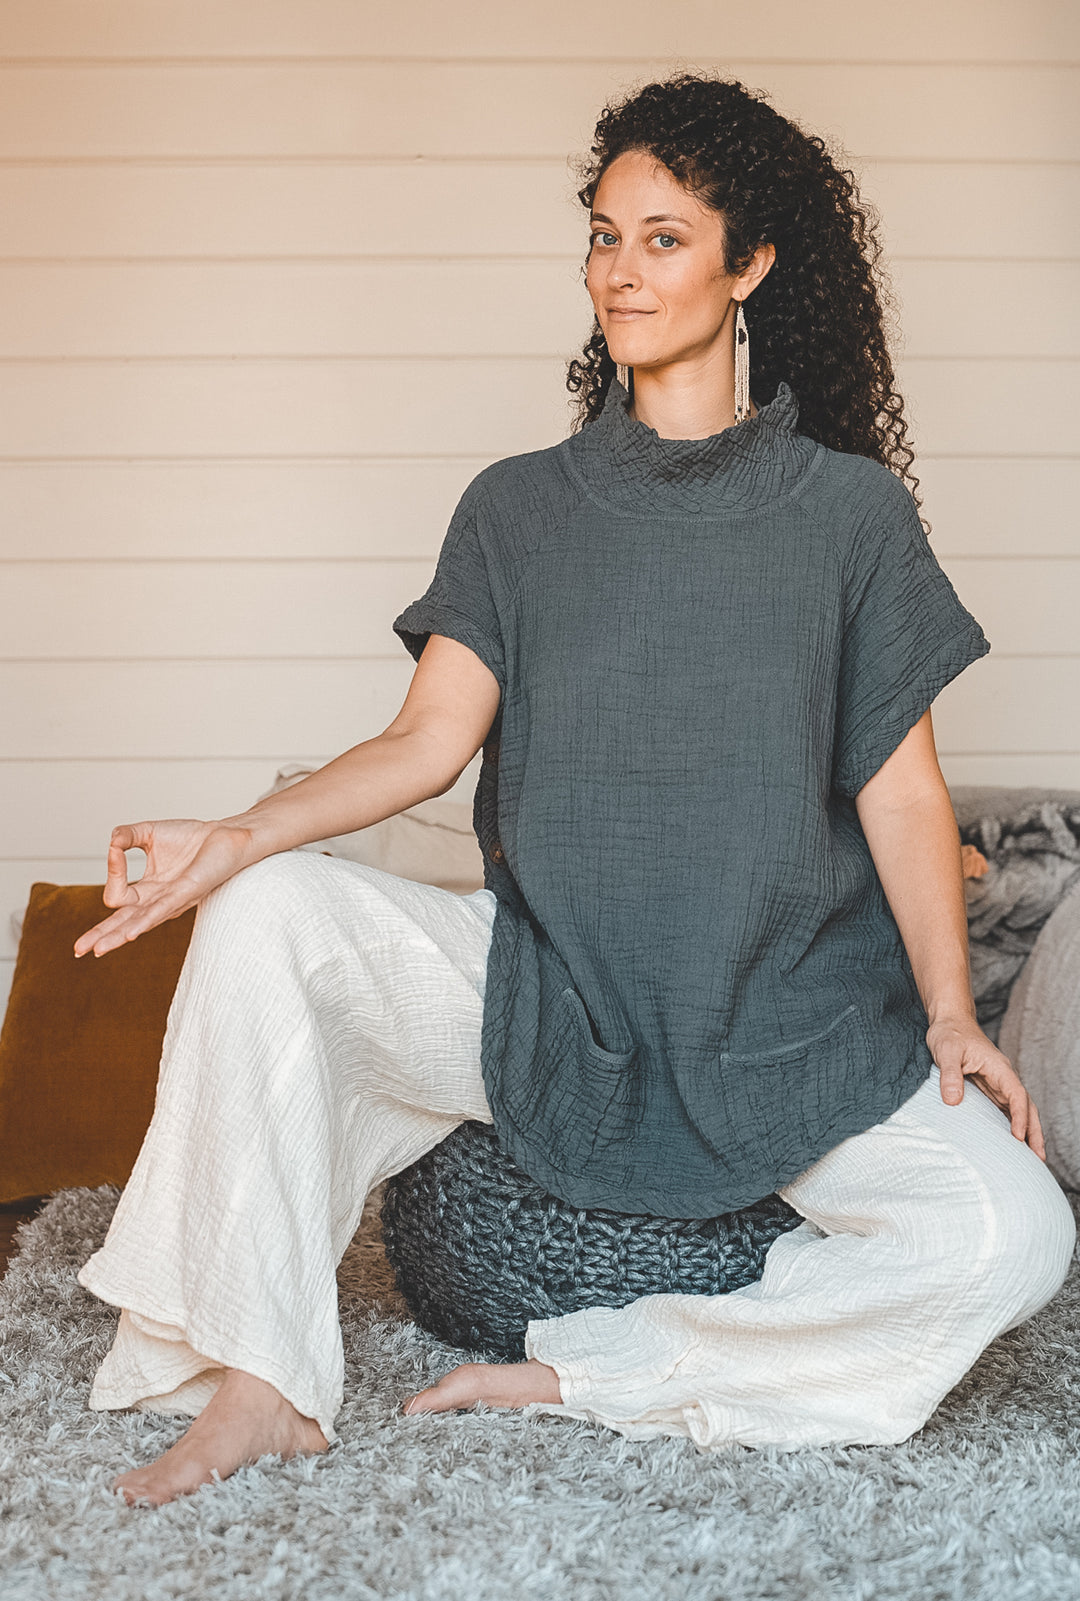 Woman wears gray shirt and white pants while sitting on meditation cushion. 